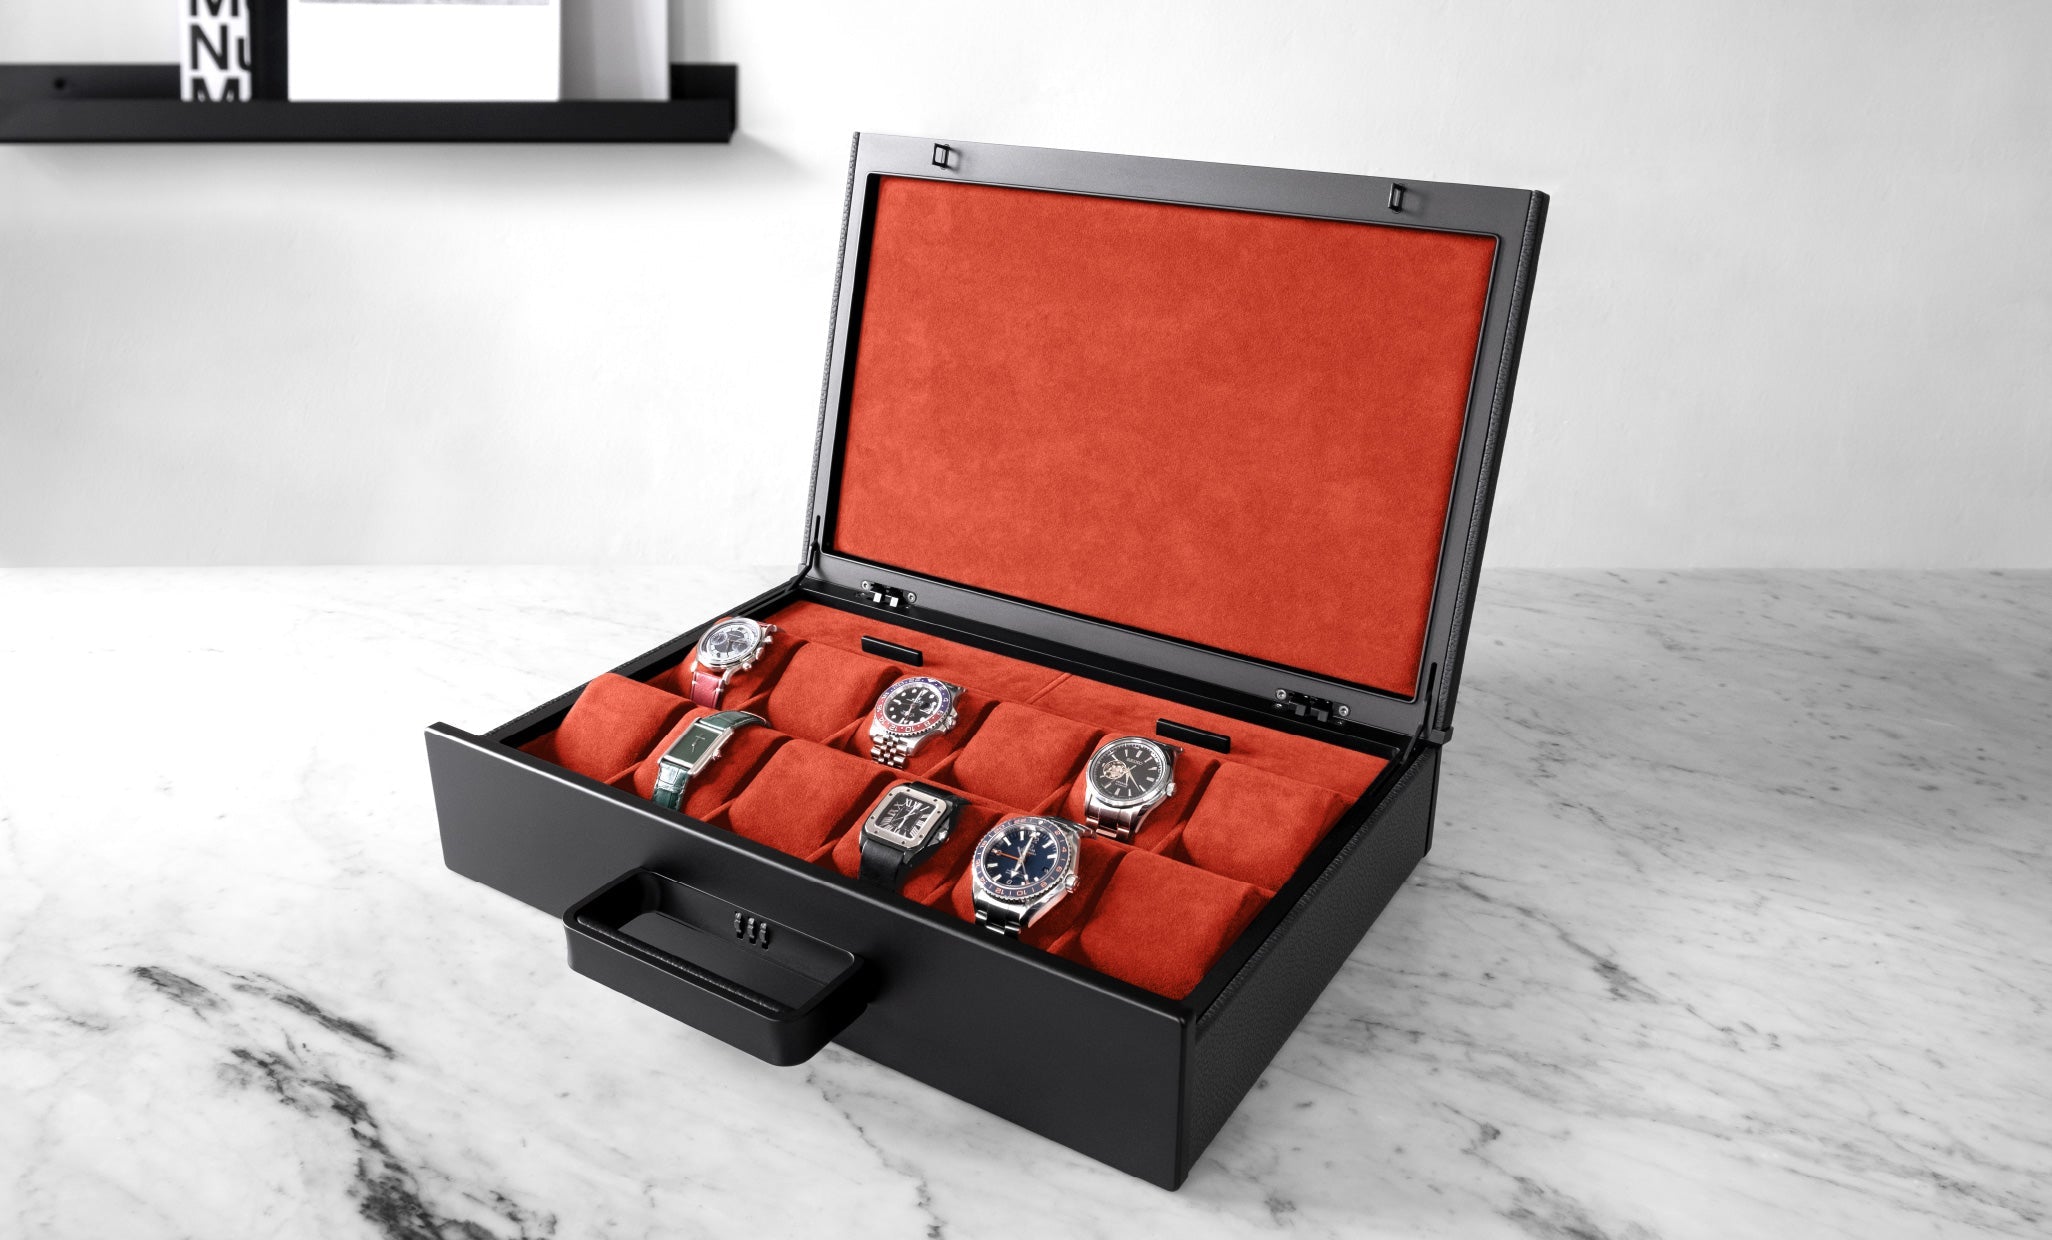 chinese lunar new year special collection of travel, business and watch accessories by Charles Simon, mackenzie watch briefcase special edition lunar new year, luxury leather accessories to celebrate chinese lunar new year